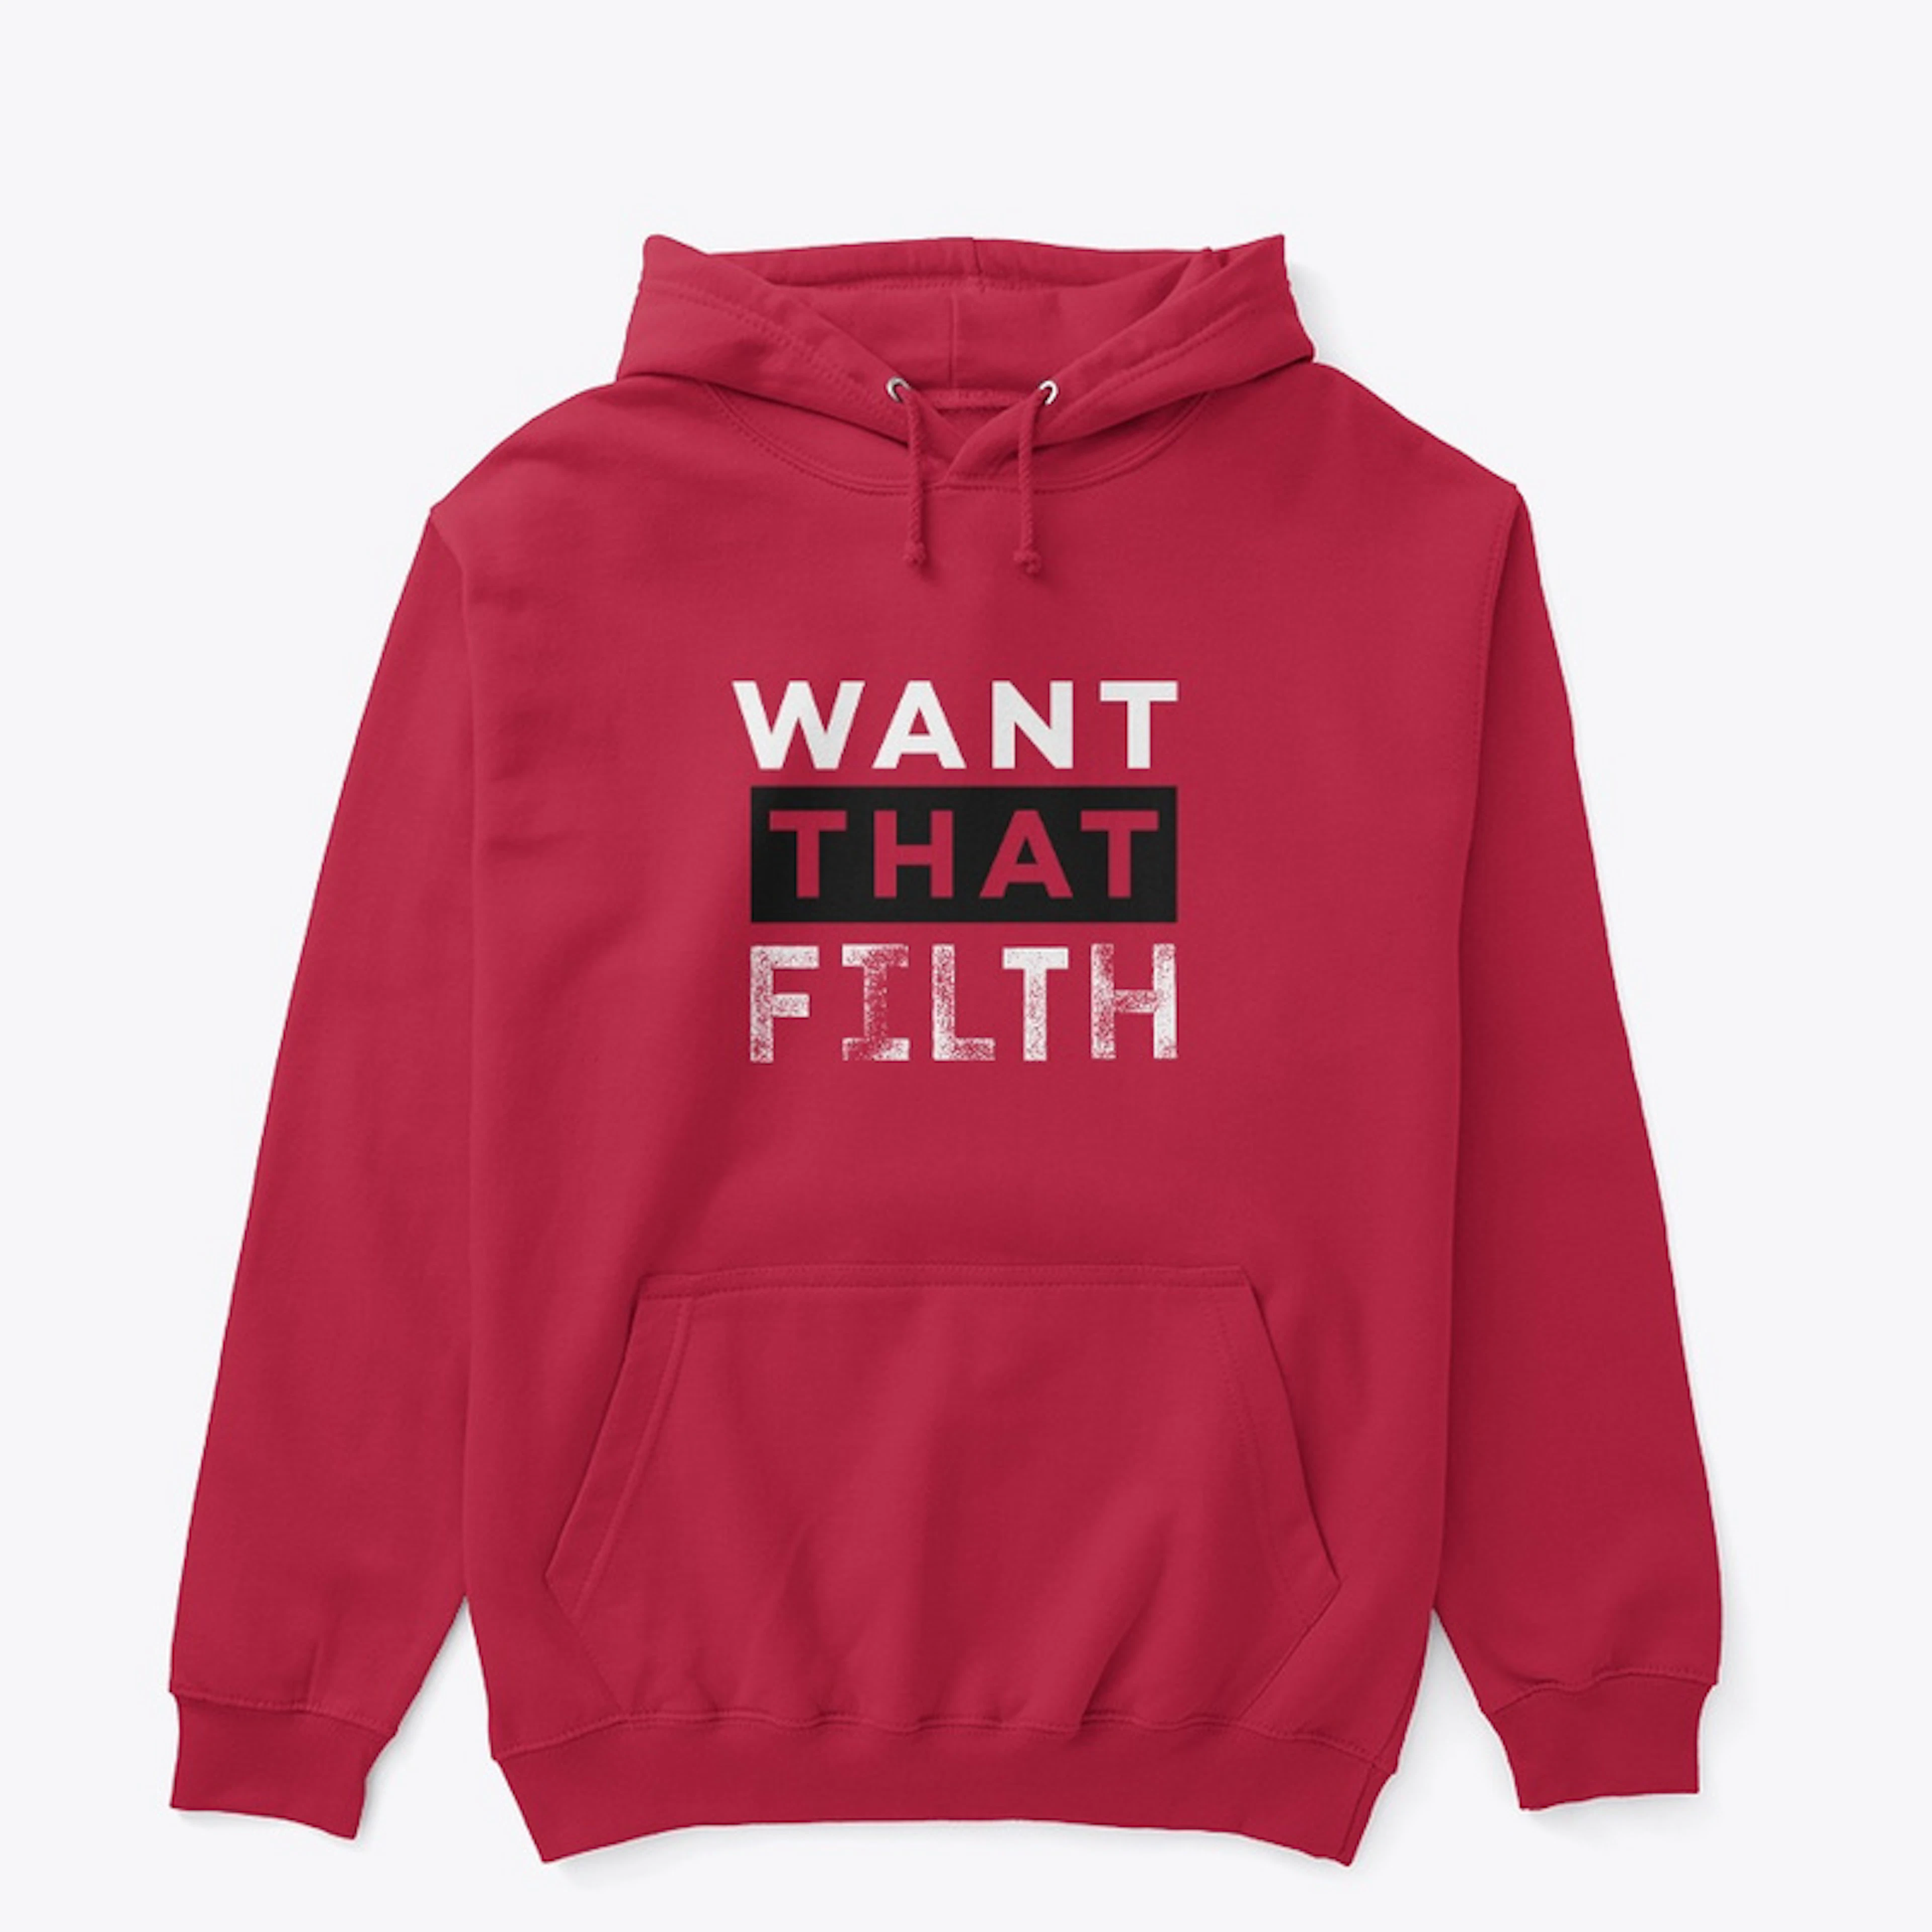 Want That Filth (Red Edition)